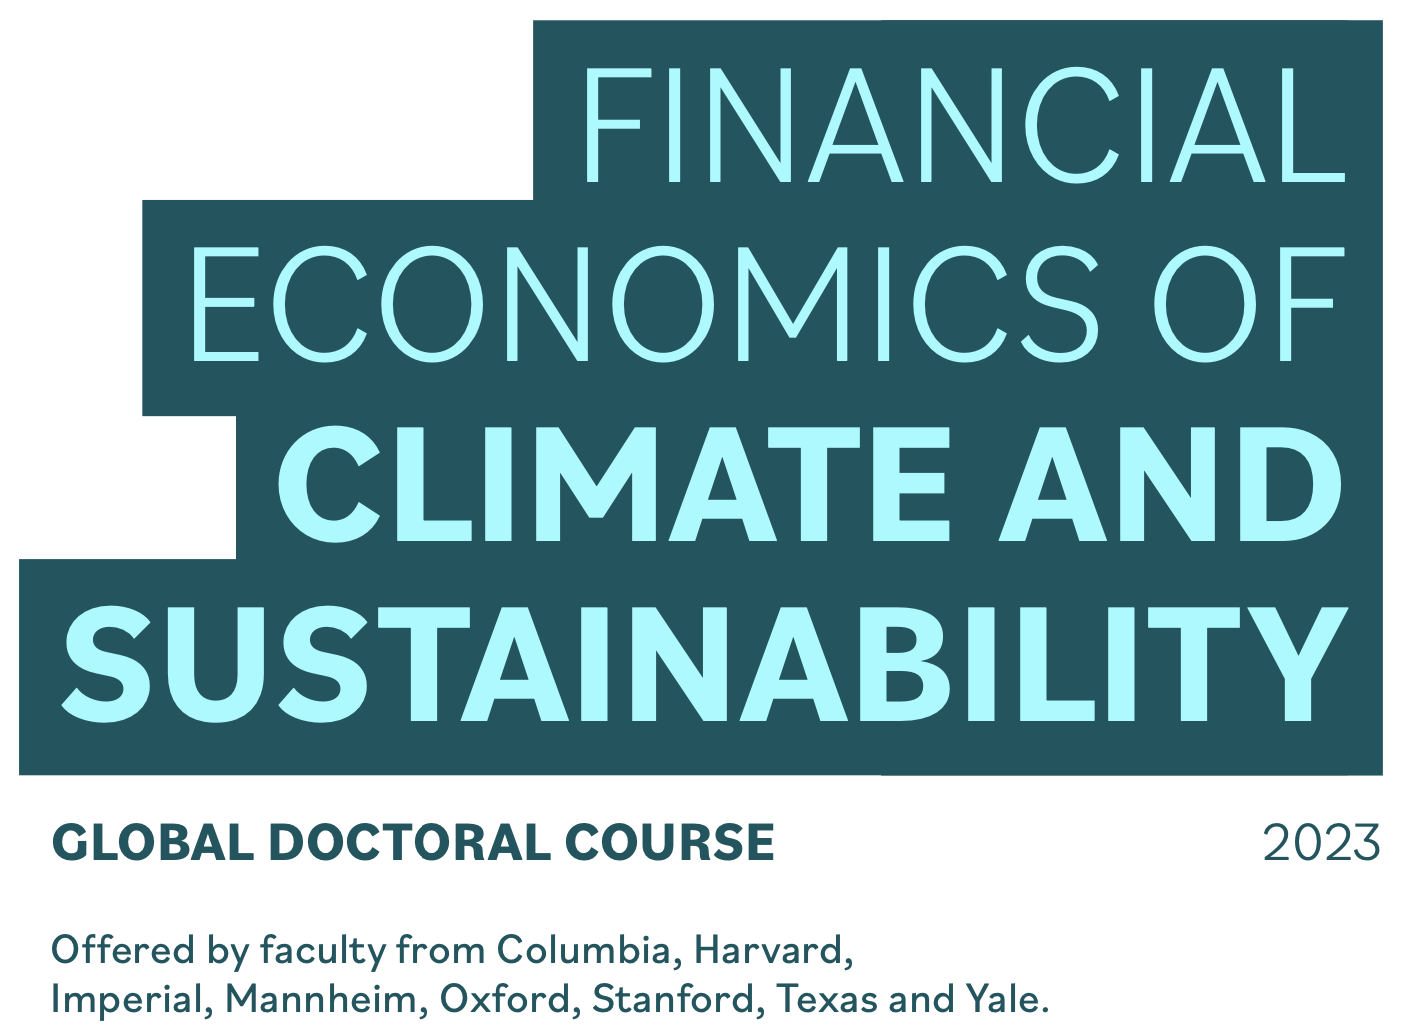 Financial Economics of Climate and Sustainability